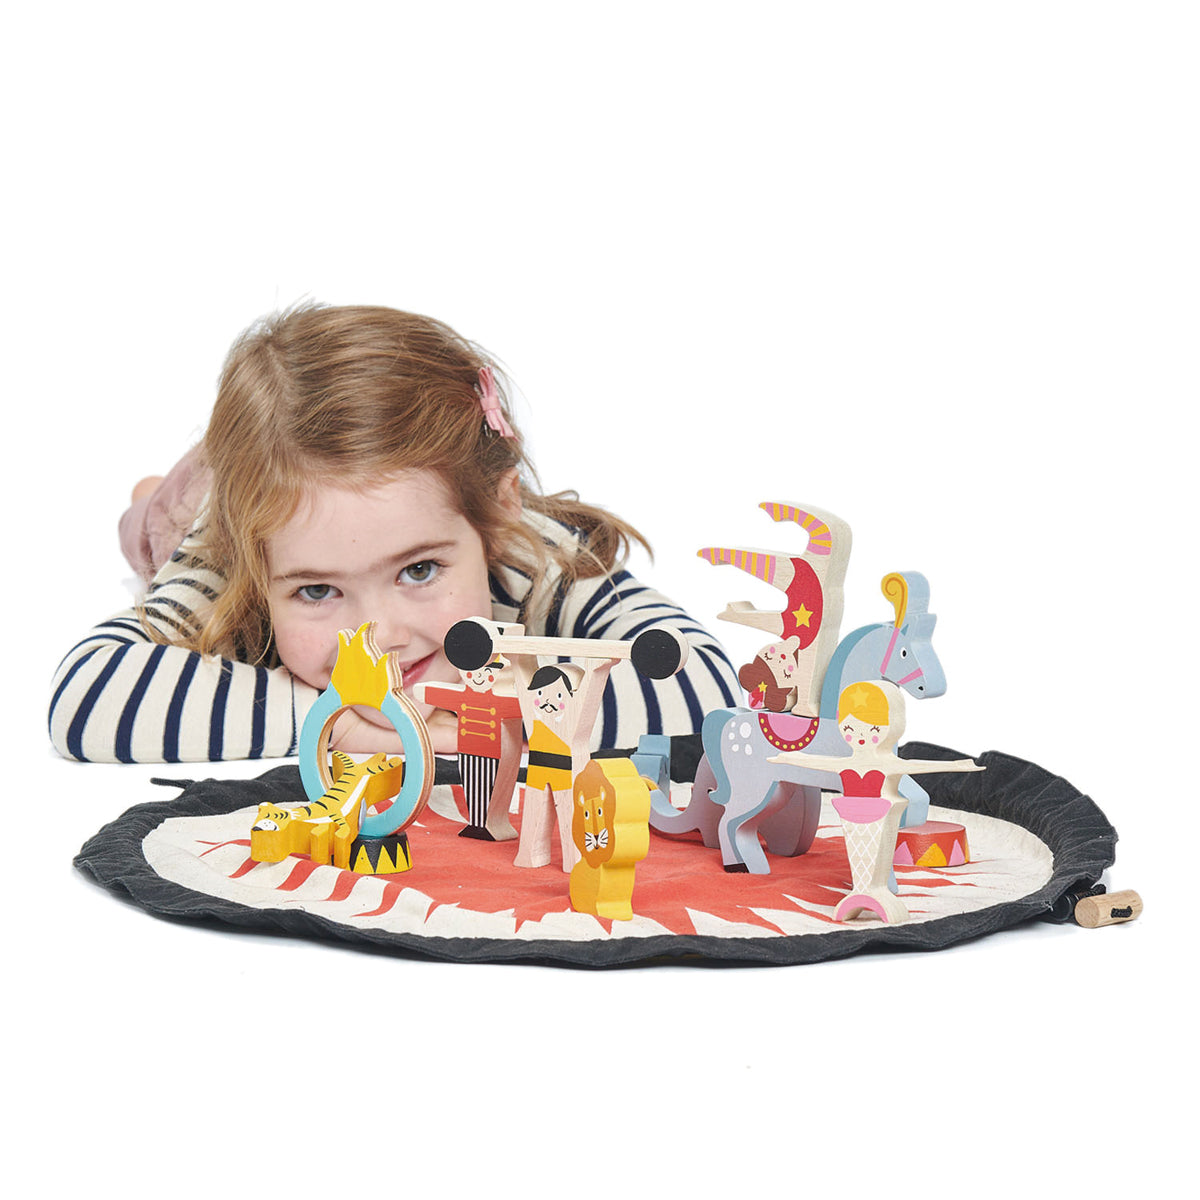 Tender Leaf Toys - Circus Stacker